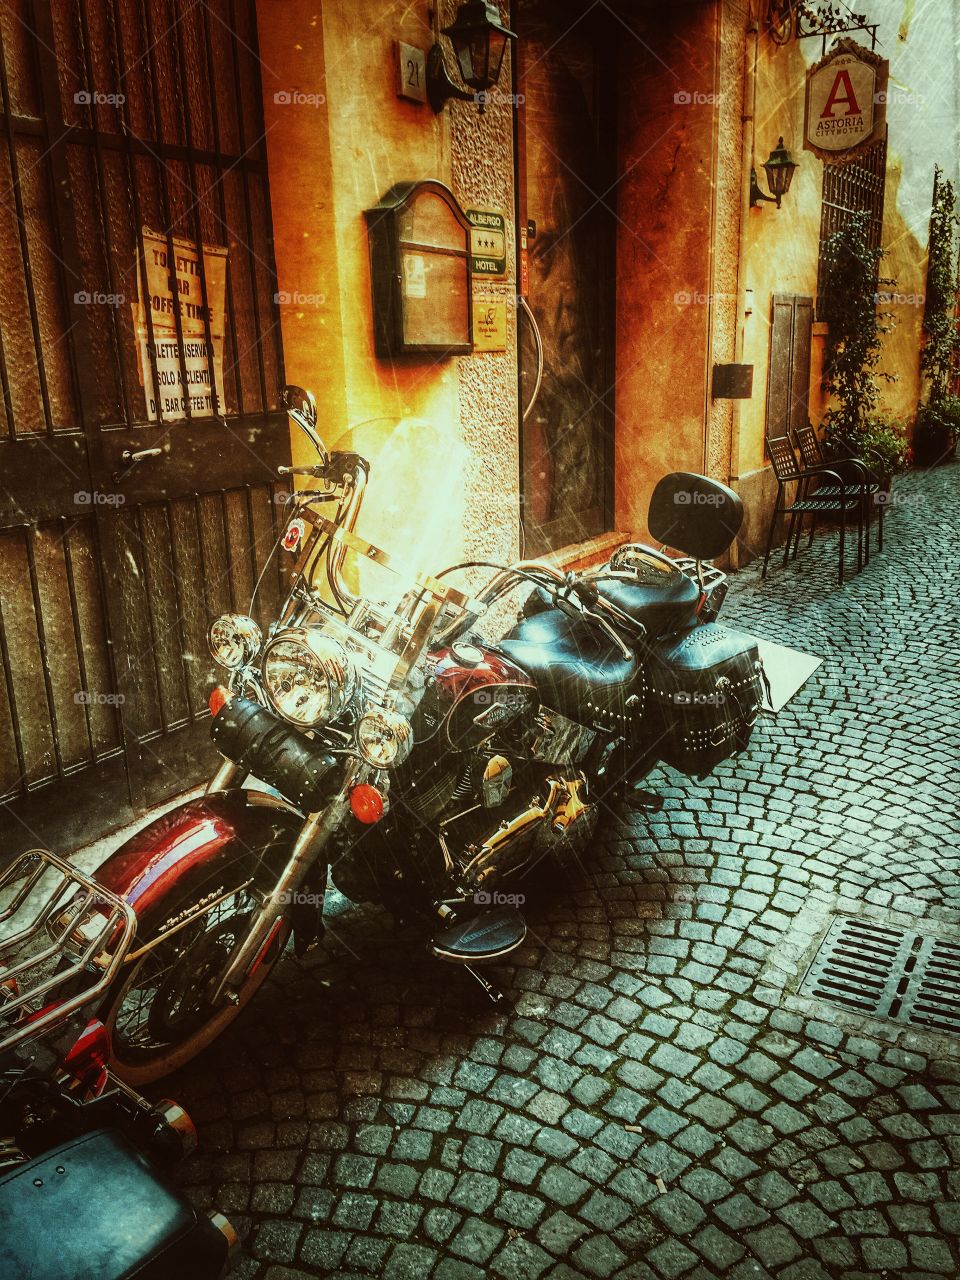 Harley davidson parked in an alley in Italy